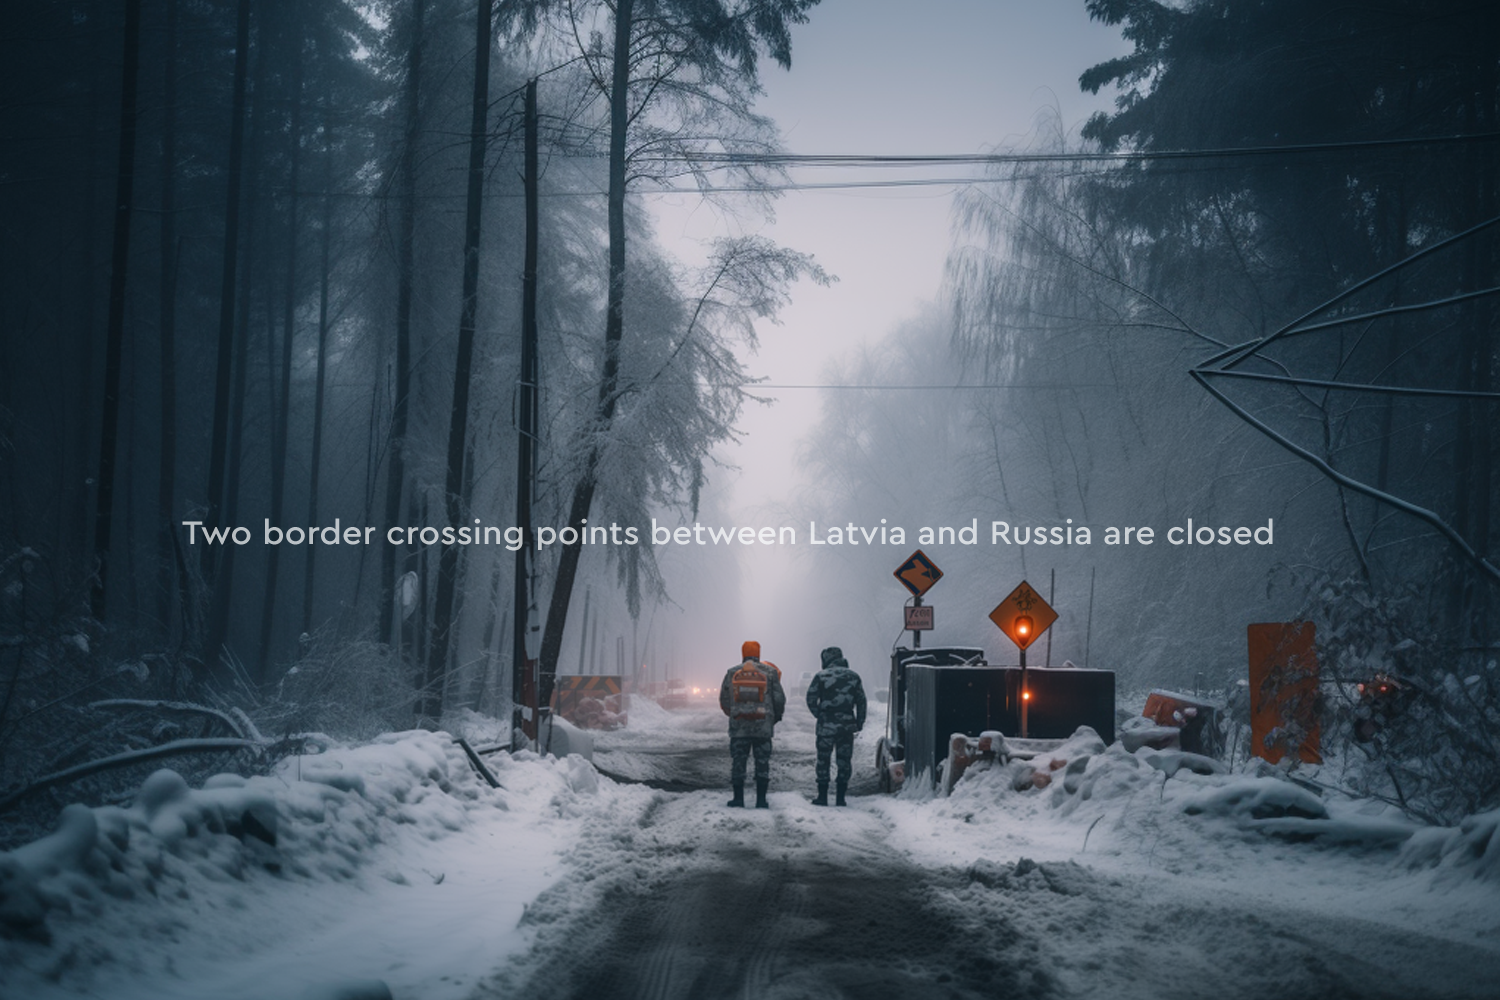 Two border crossing points between Latvia and Russia are closed.